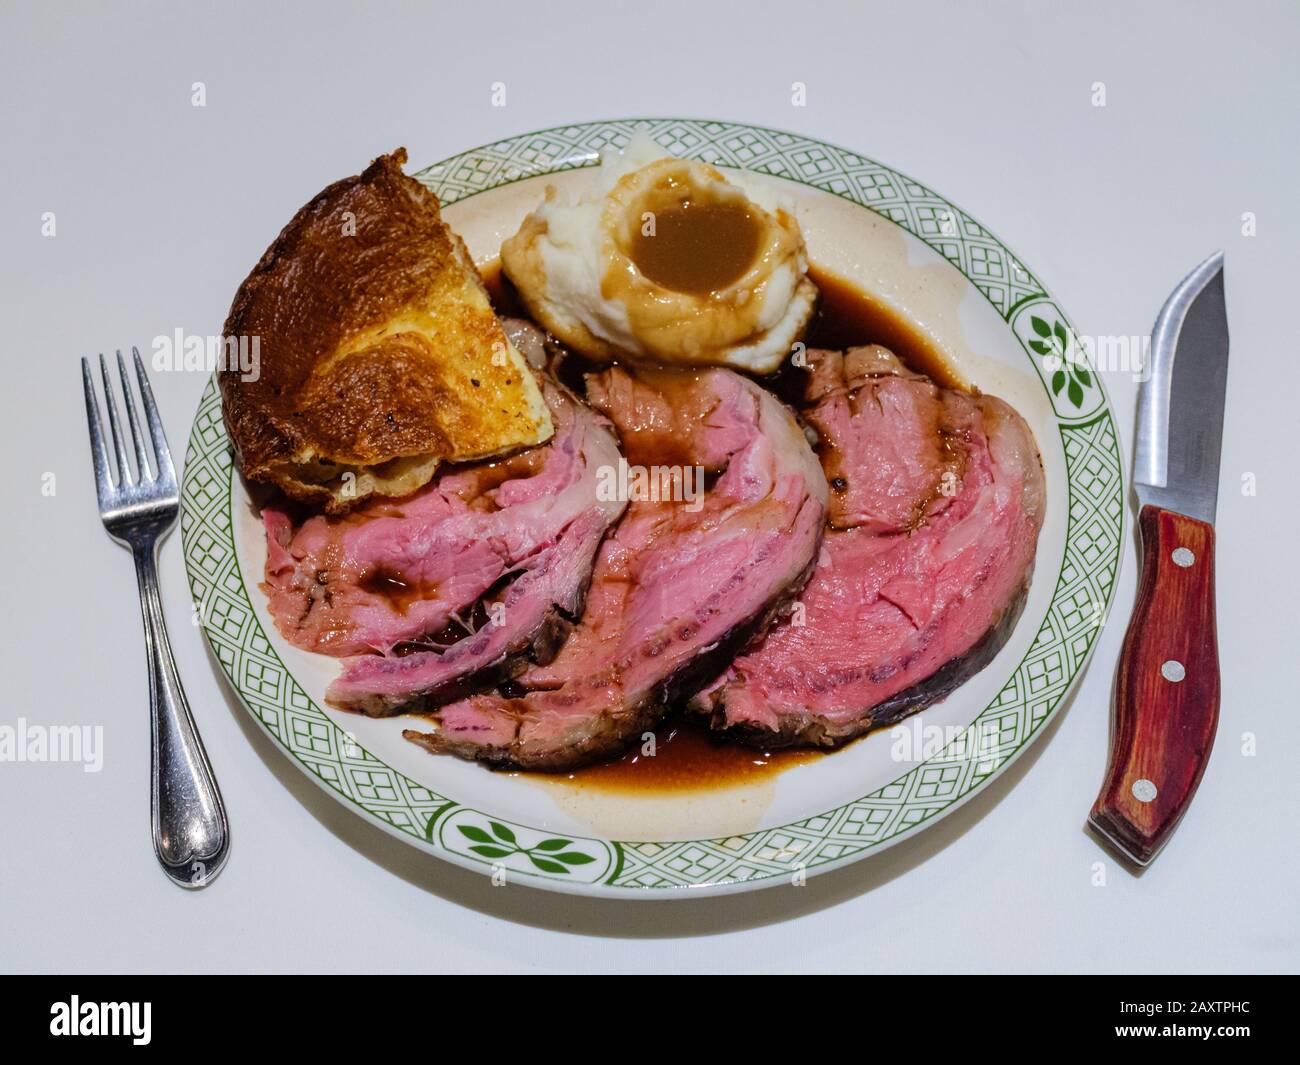 A delicious traditional Sunday roast dinner - slices of medium-rare roast beef and gravy, mashed potato, and Yorkshire pudding on a porcelain plate Stock Photo